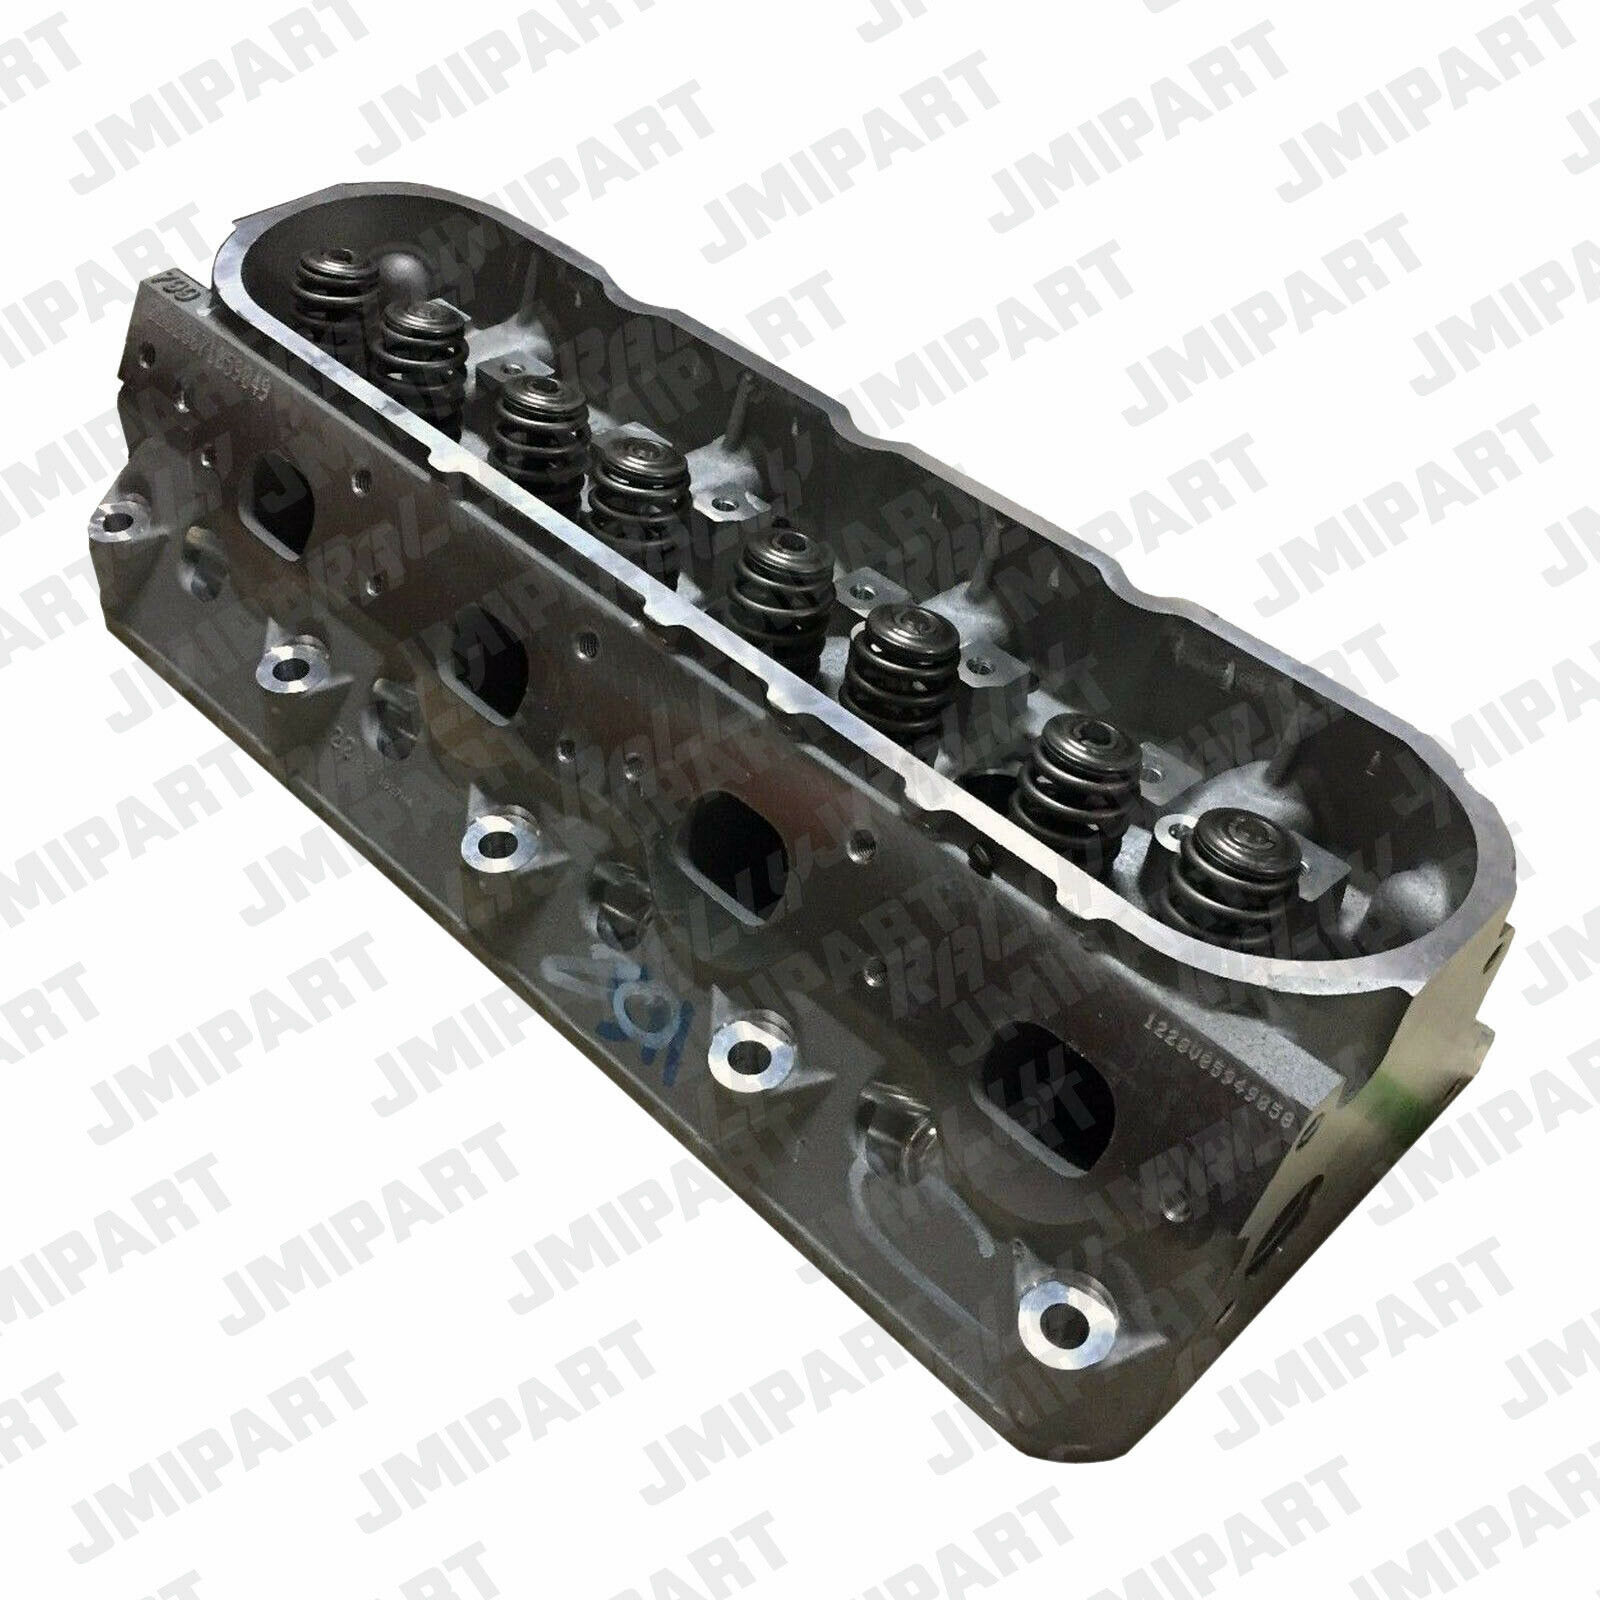 New Cylinder Head With Valves 99-05 Chevy Gm Tahoe Silverado 4.8L/5.3L V8 (334)